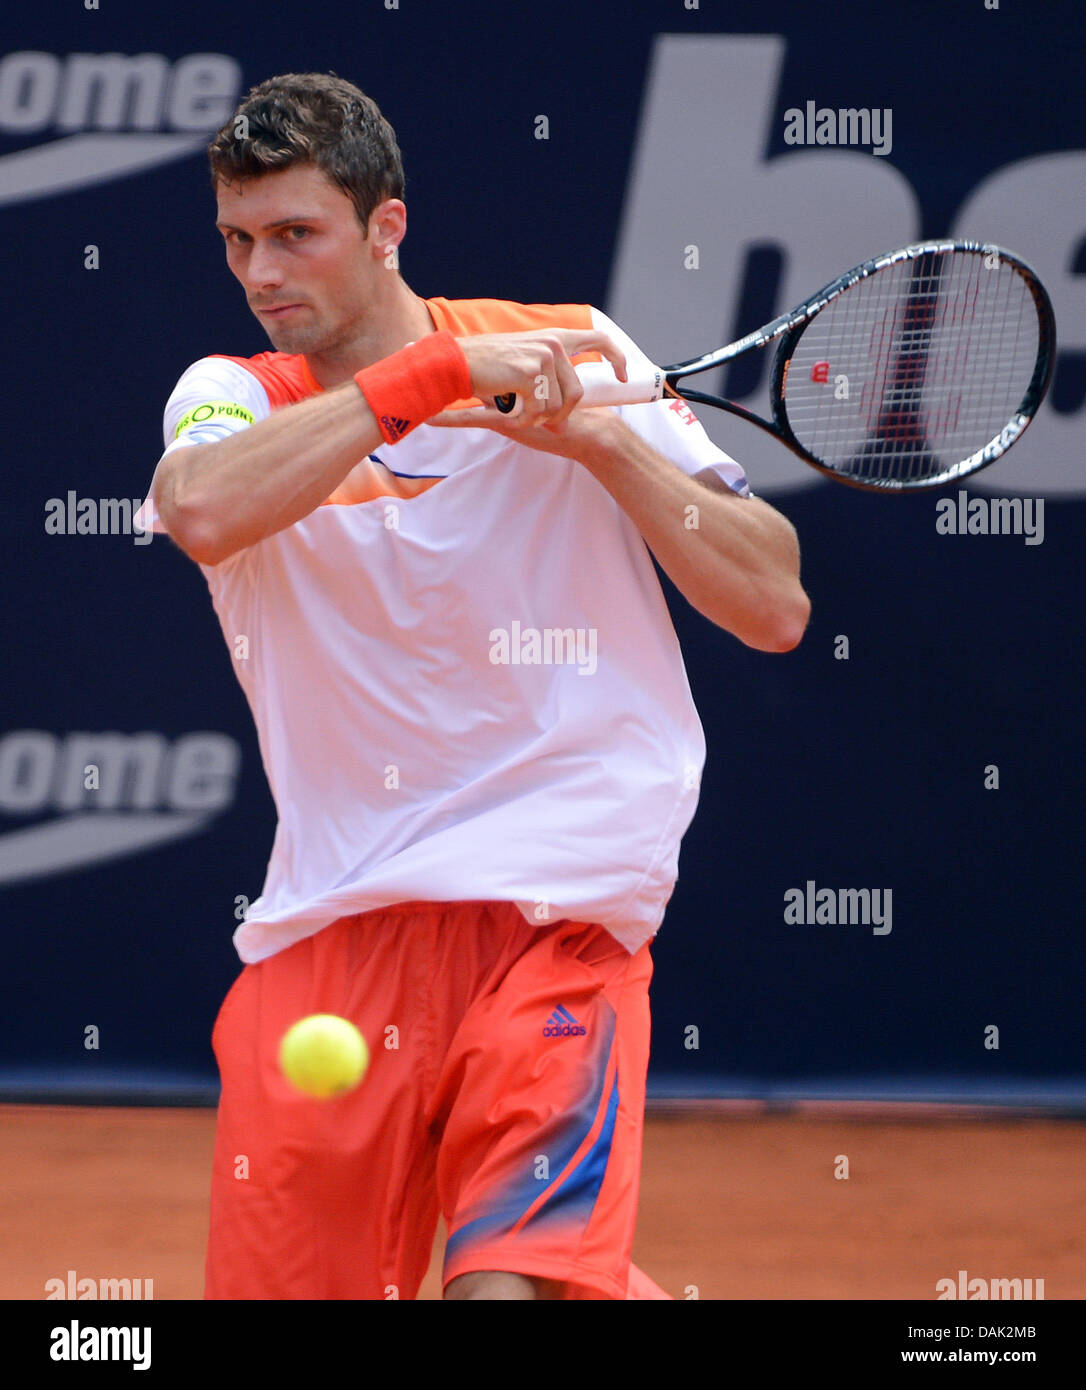 German tennis player Daniel Brands hits the ball during a first round match  against Lorenzi from Italy at the ATP tournament in Hamburg, Germany, 15  July 2013. Photo: Axel Heimken Stock Photo - Alamy